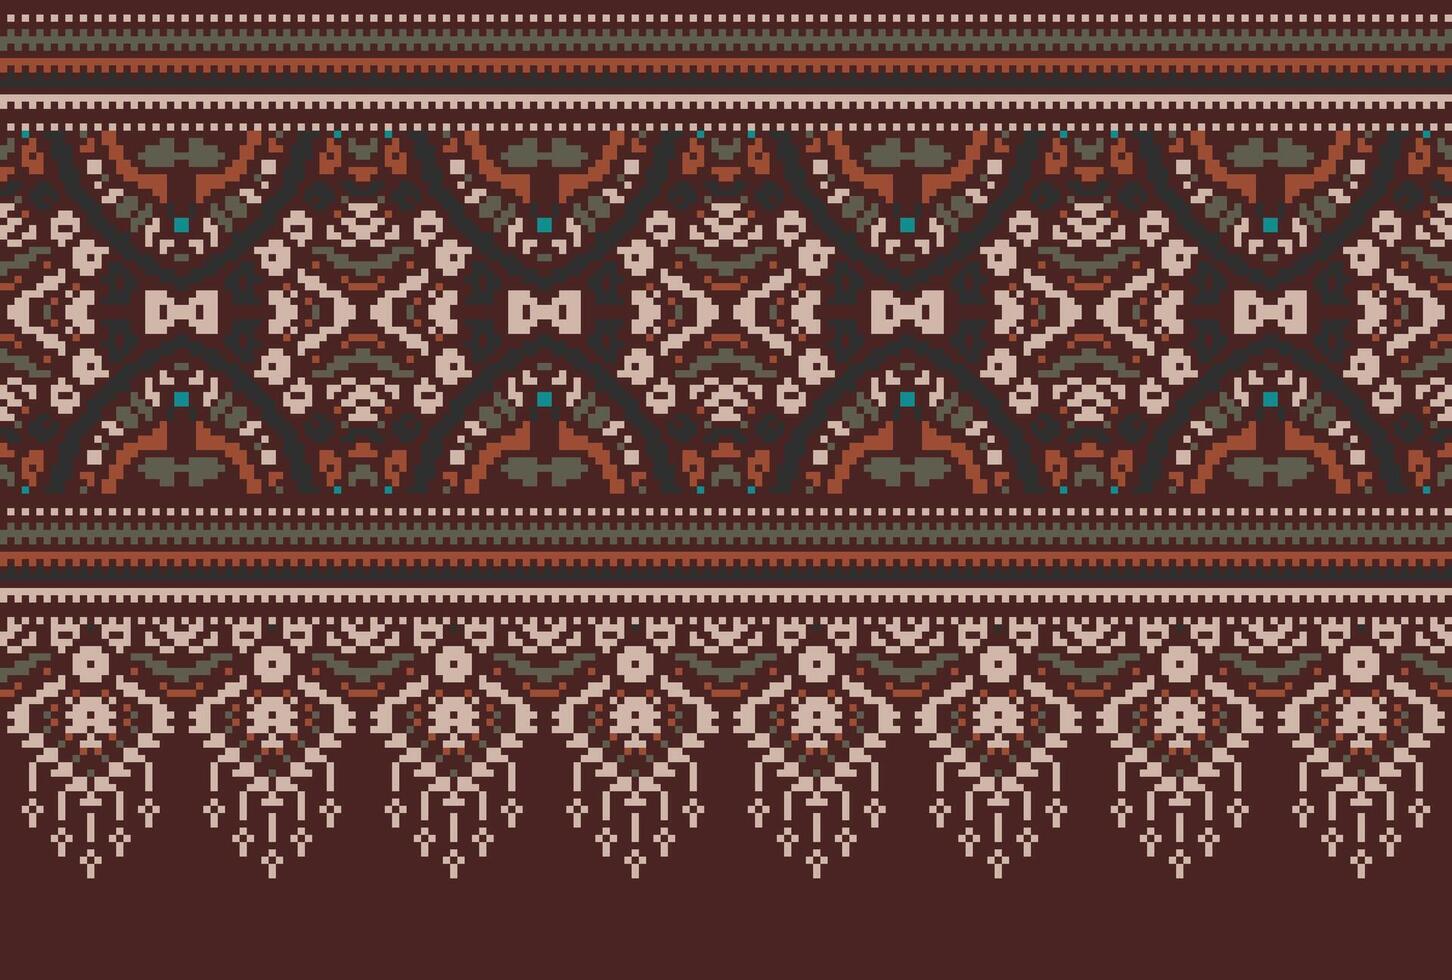 Pixel Cross Stitch Traditional Ethnic Pattern Paisley Flower Ikat Background Abstract Aztec African Indonesian Indian Seamless Pattern for Fabric Print Cloth Dress Carpet Curtains and Sarong vector